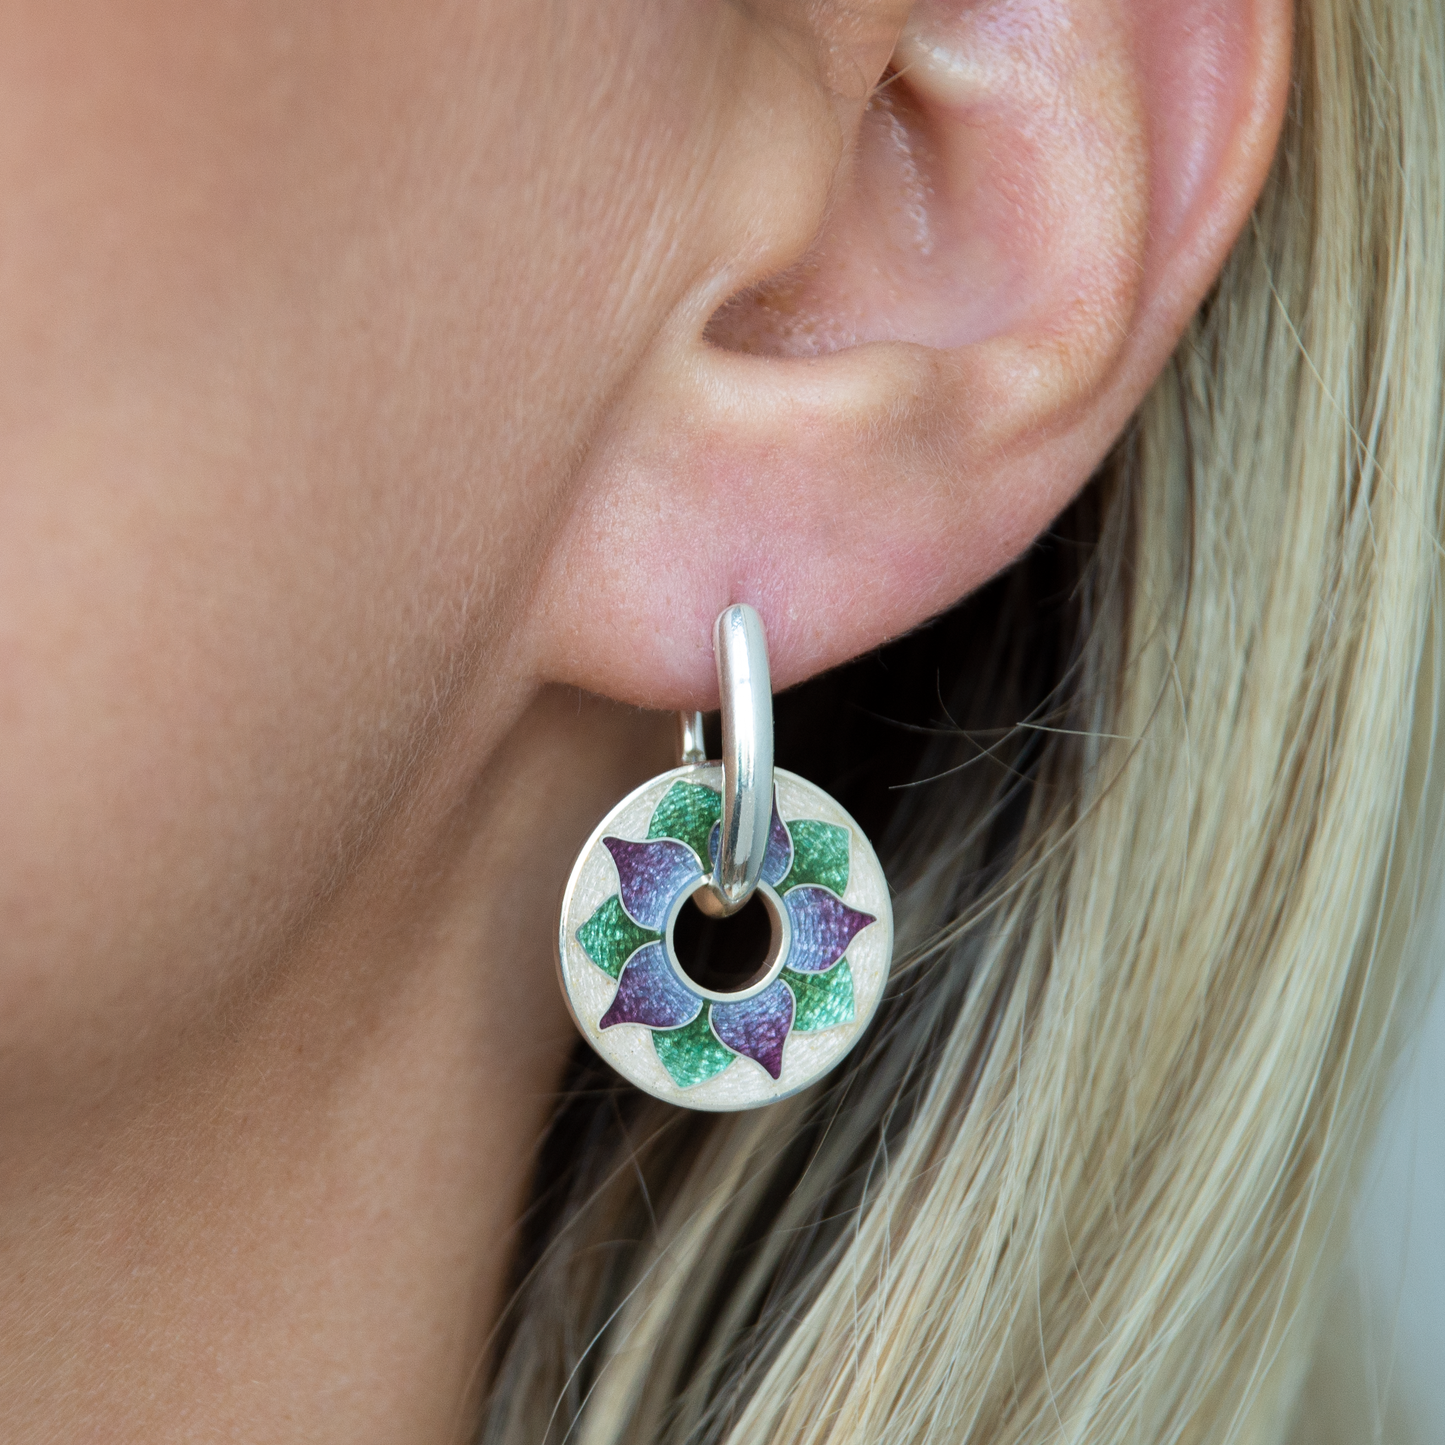 Rotating Floral Cloisonné Enamel, Silver Earrings "Glory-Of-The-Snow"